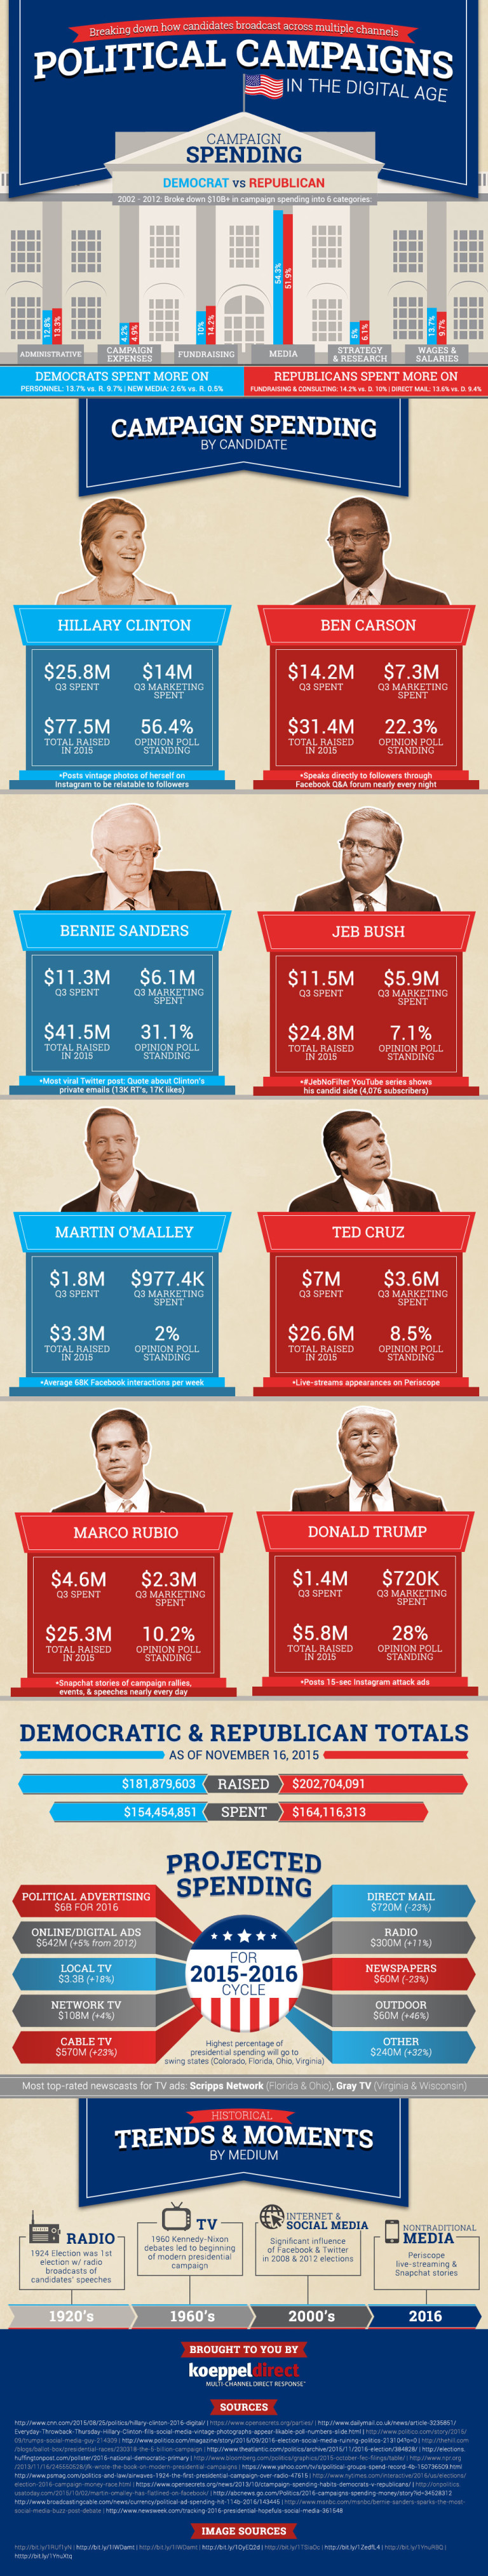 Political Campaigns in the Digital Age infographic